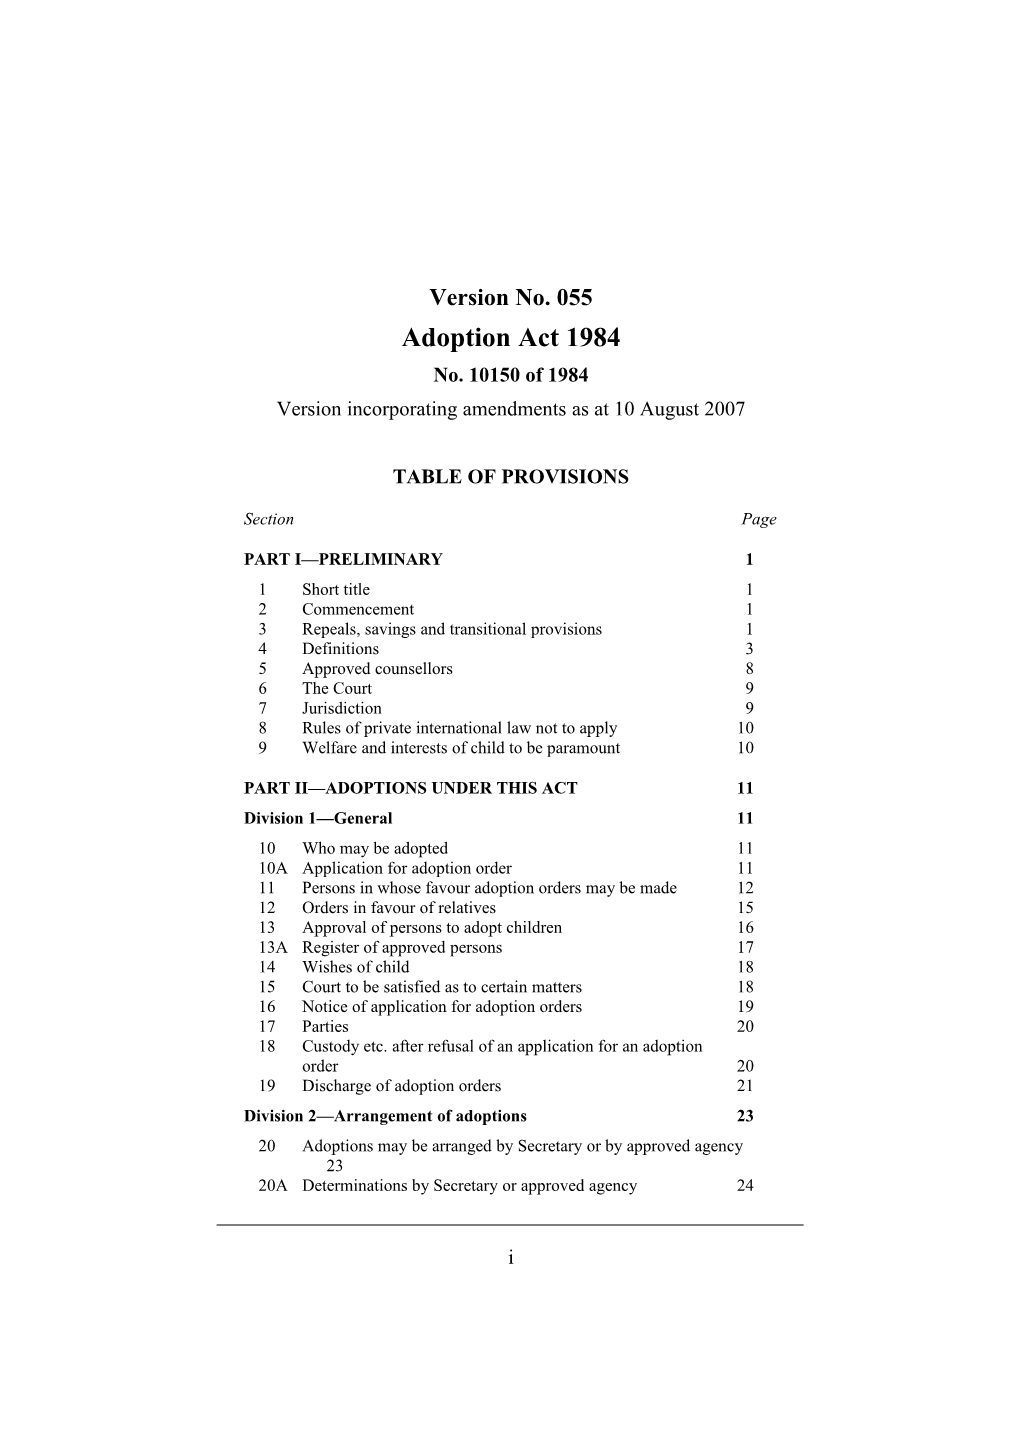 Version Incorporating Amendments As at 10 August 2007